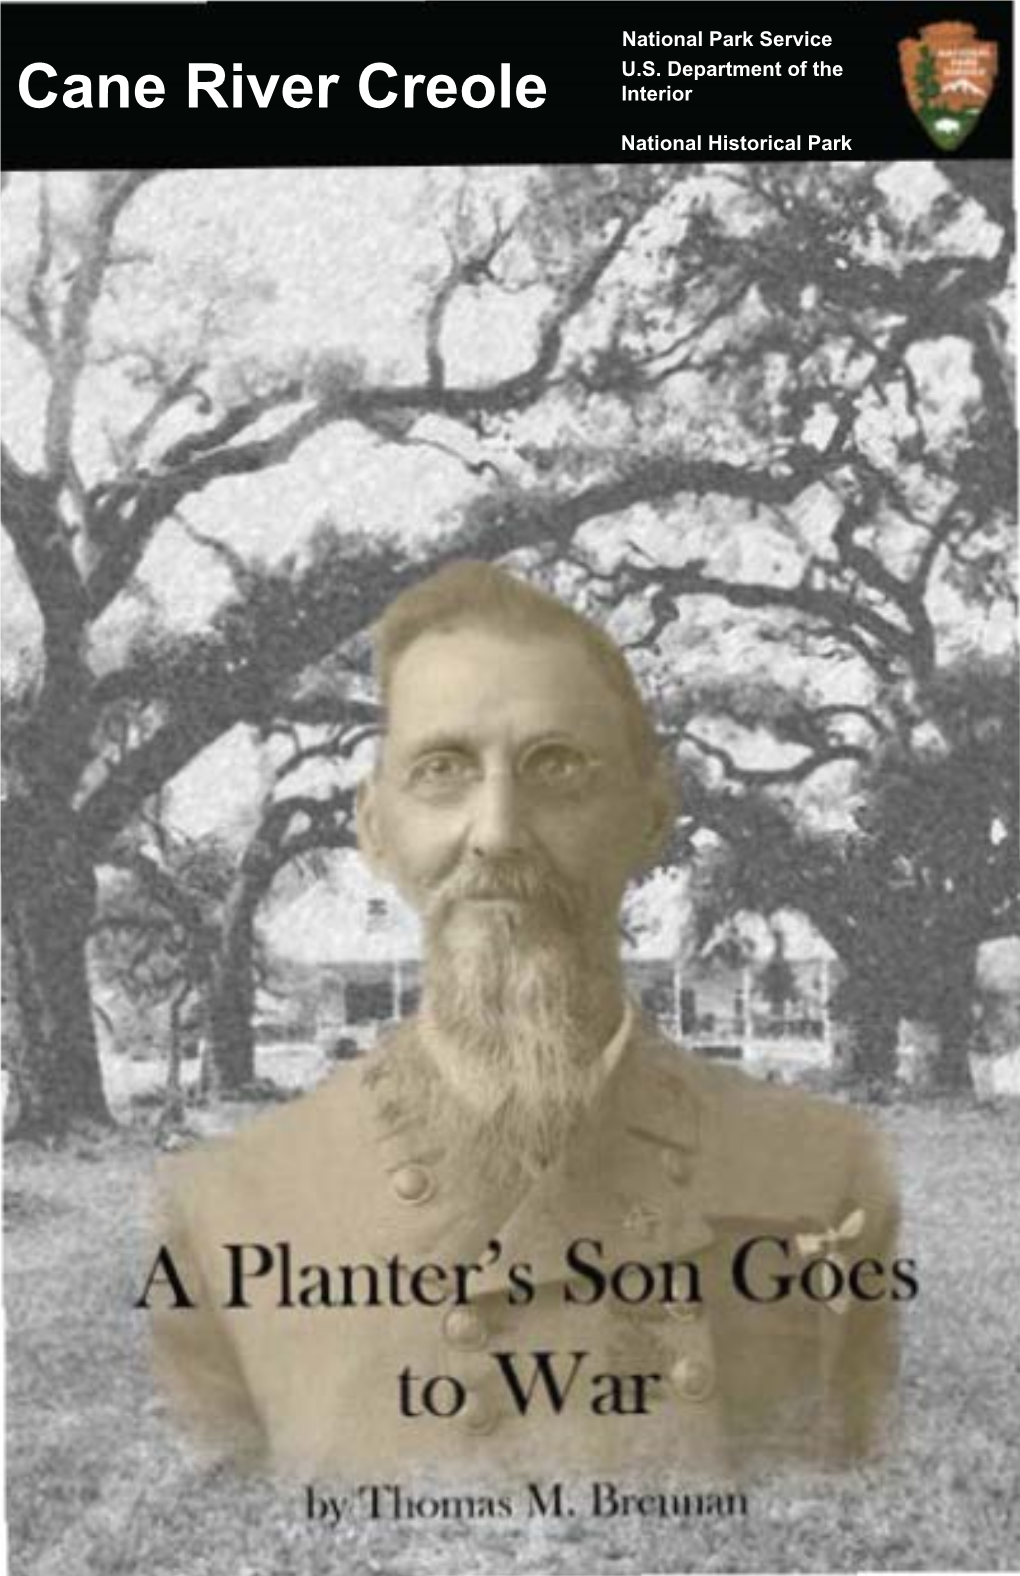 A Planter's Son Goes To